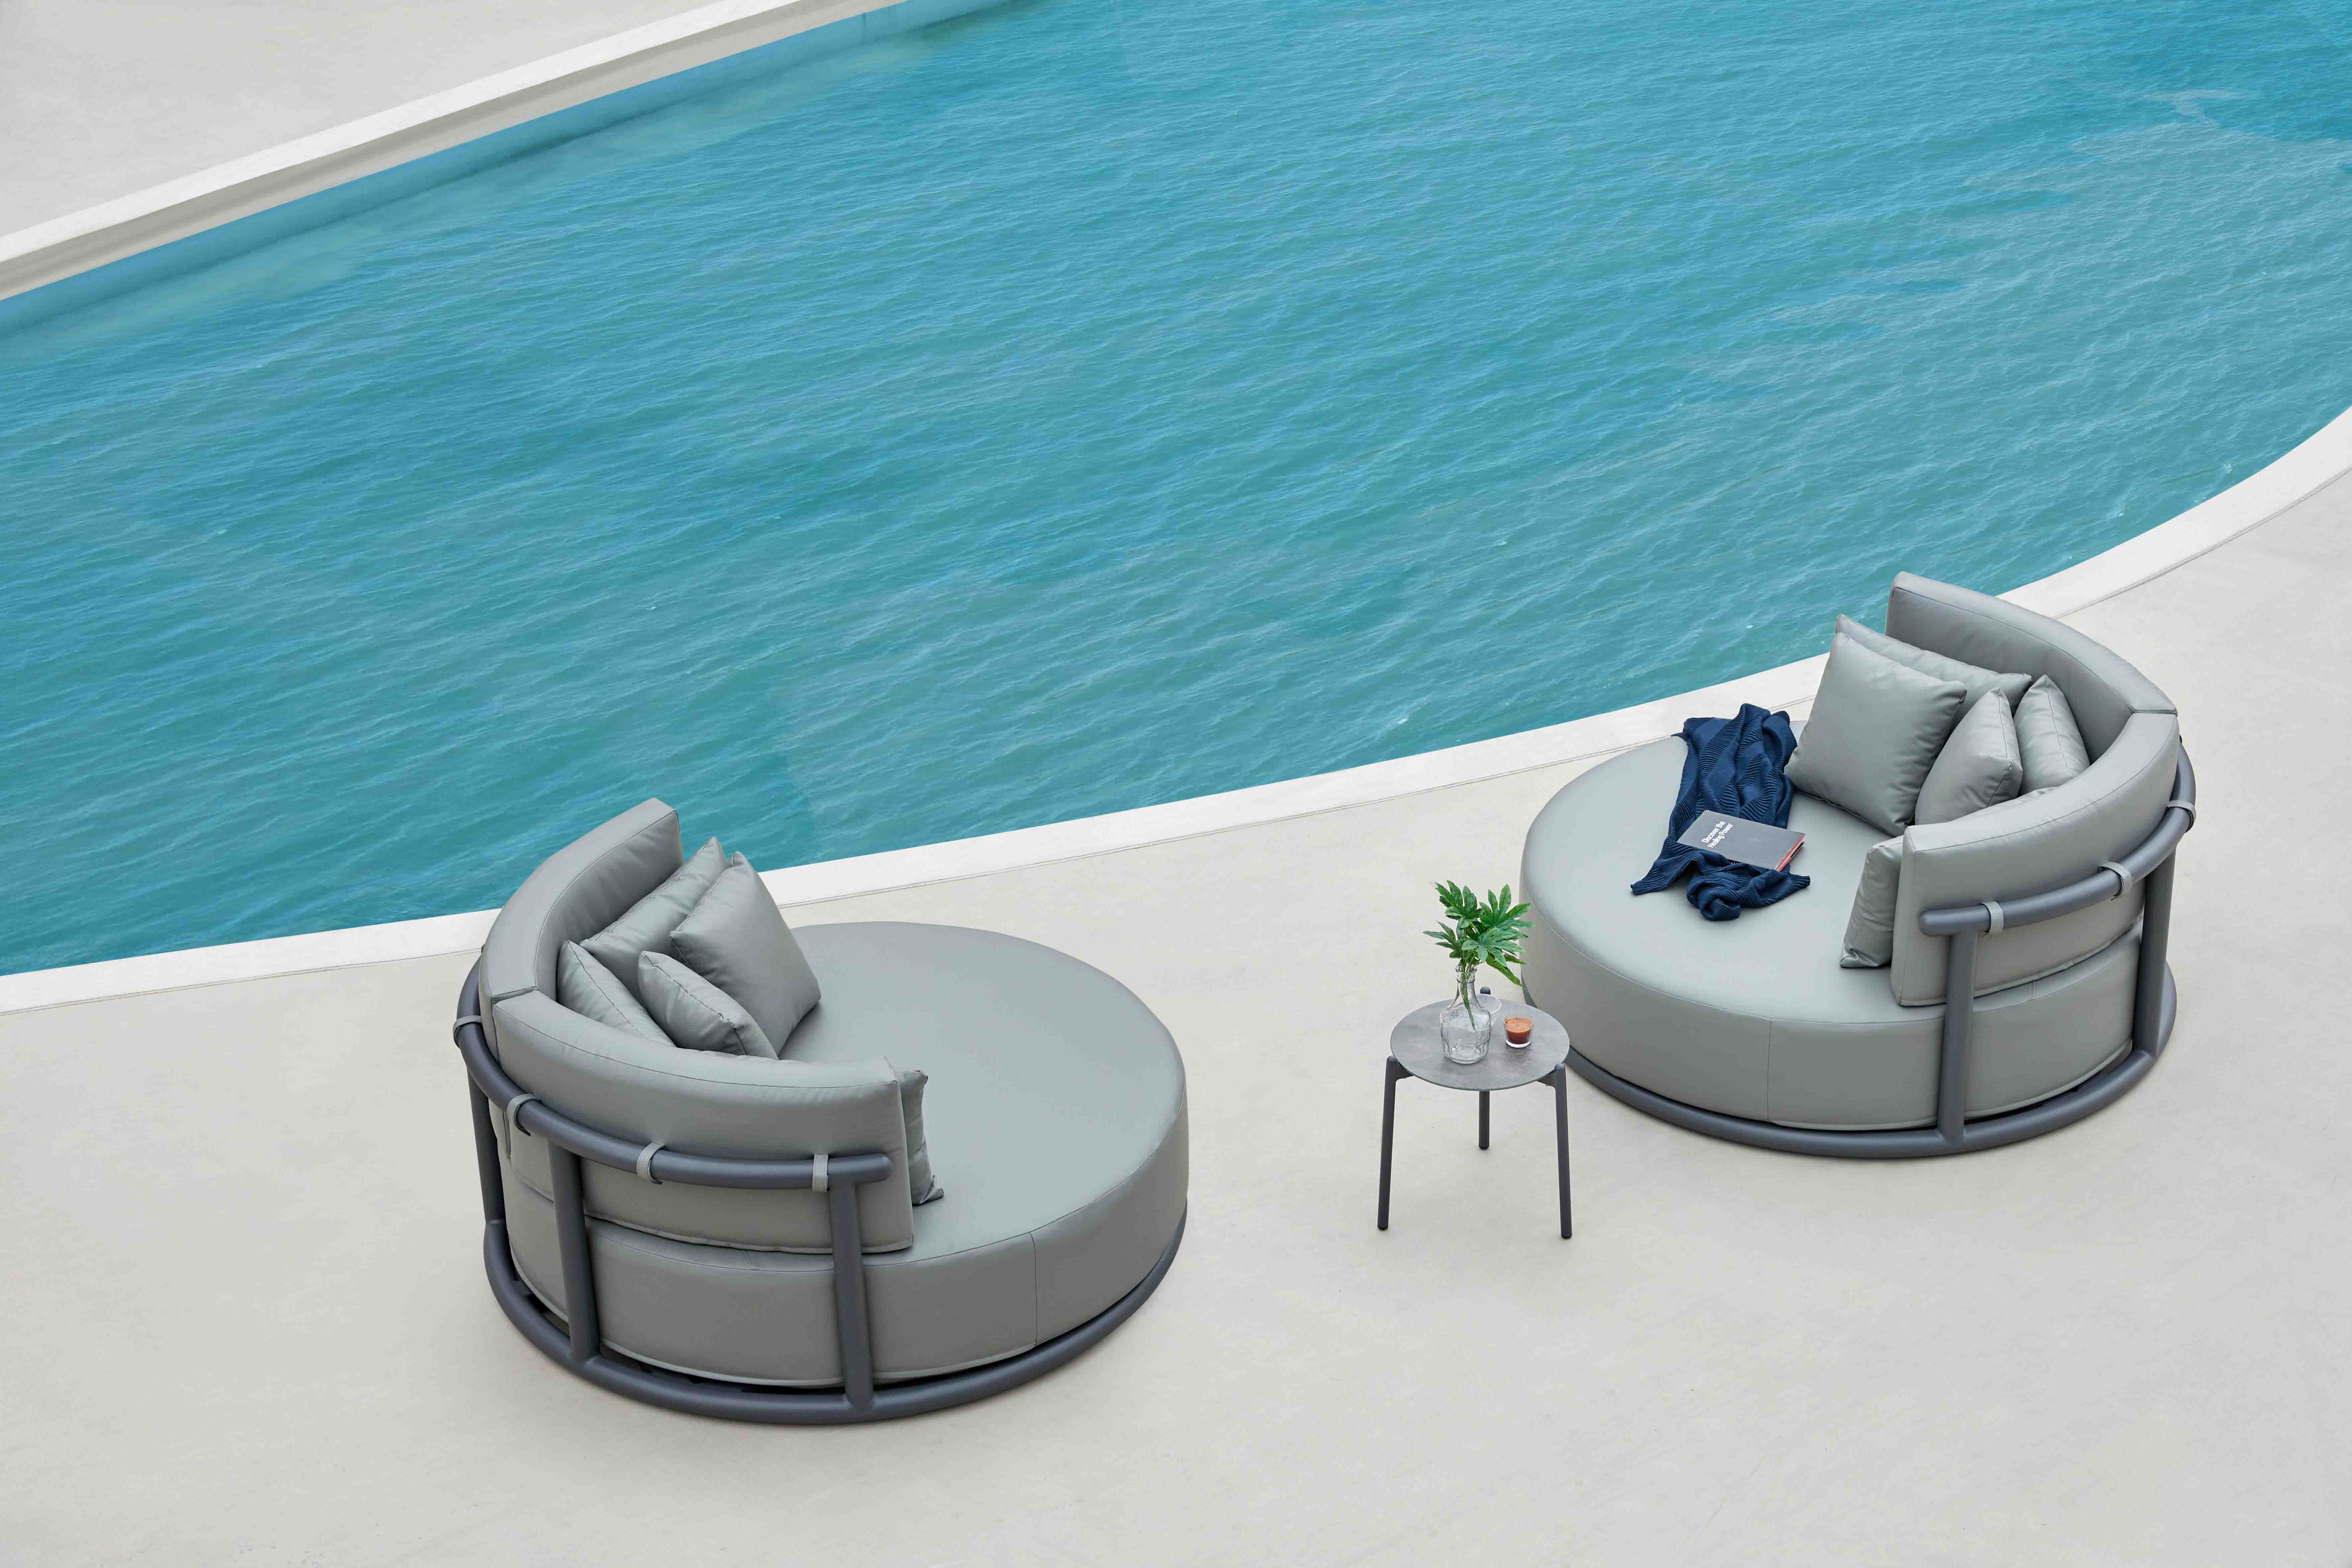 Armani alu.round daybed S3